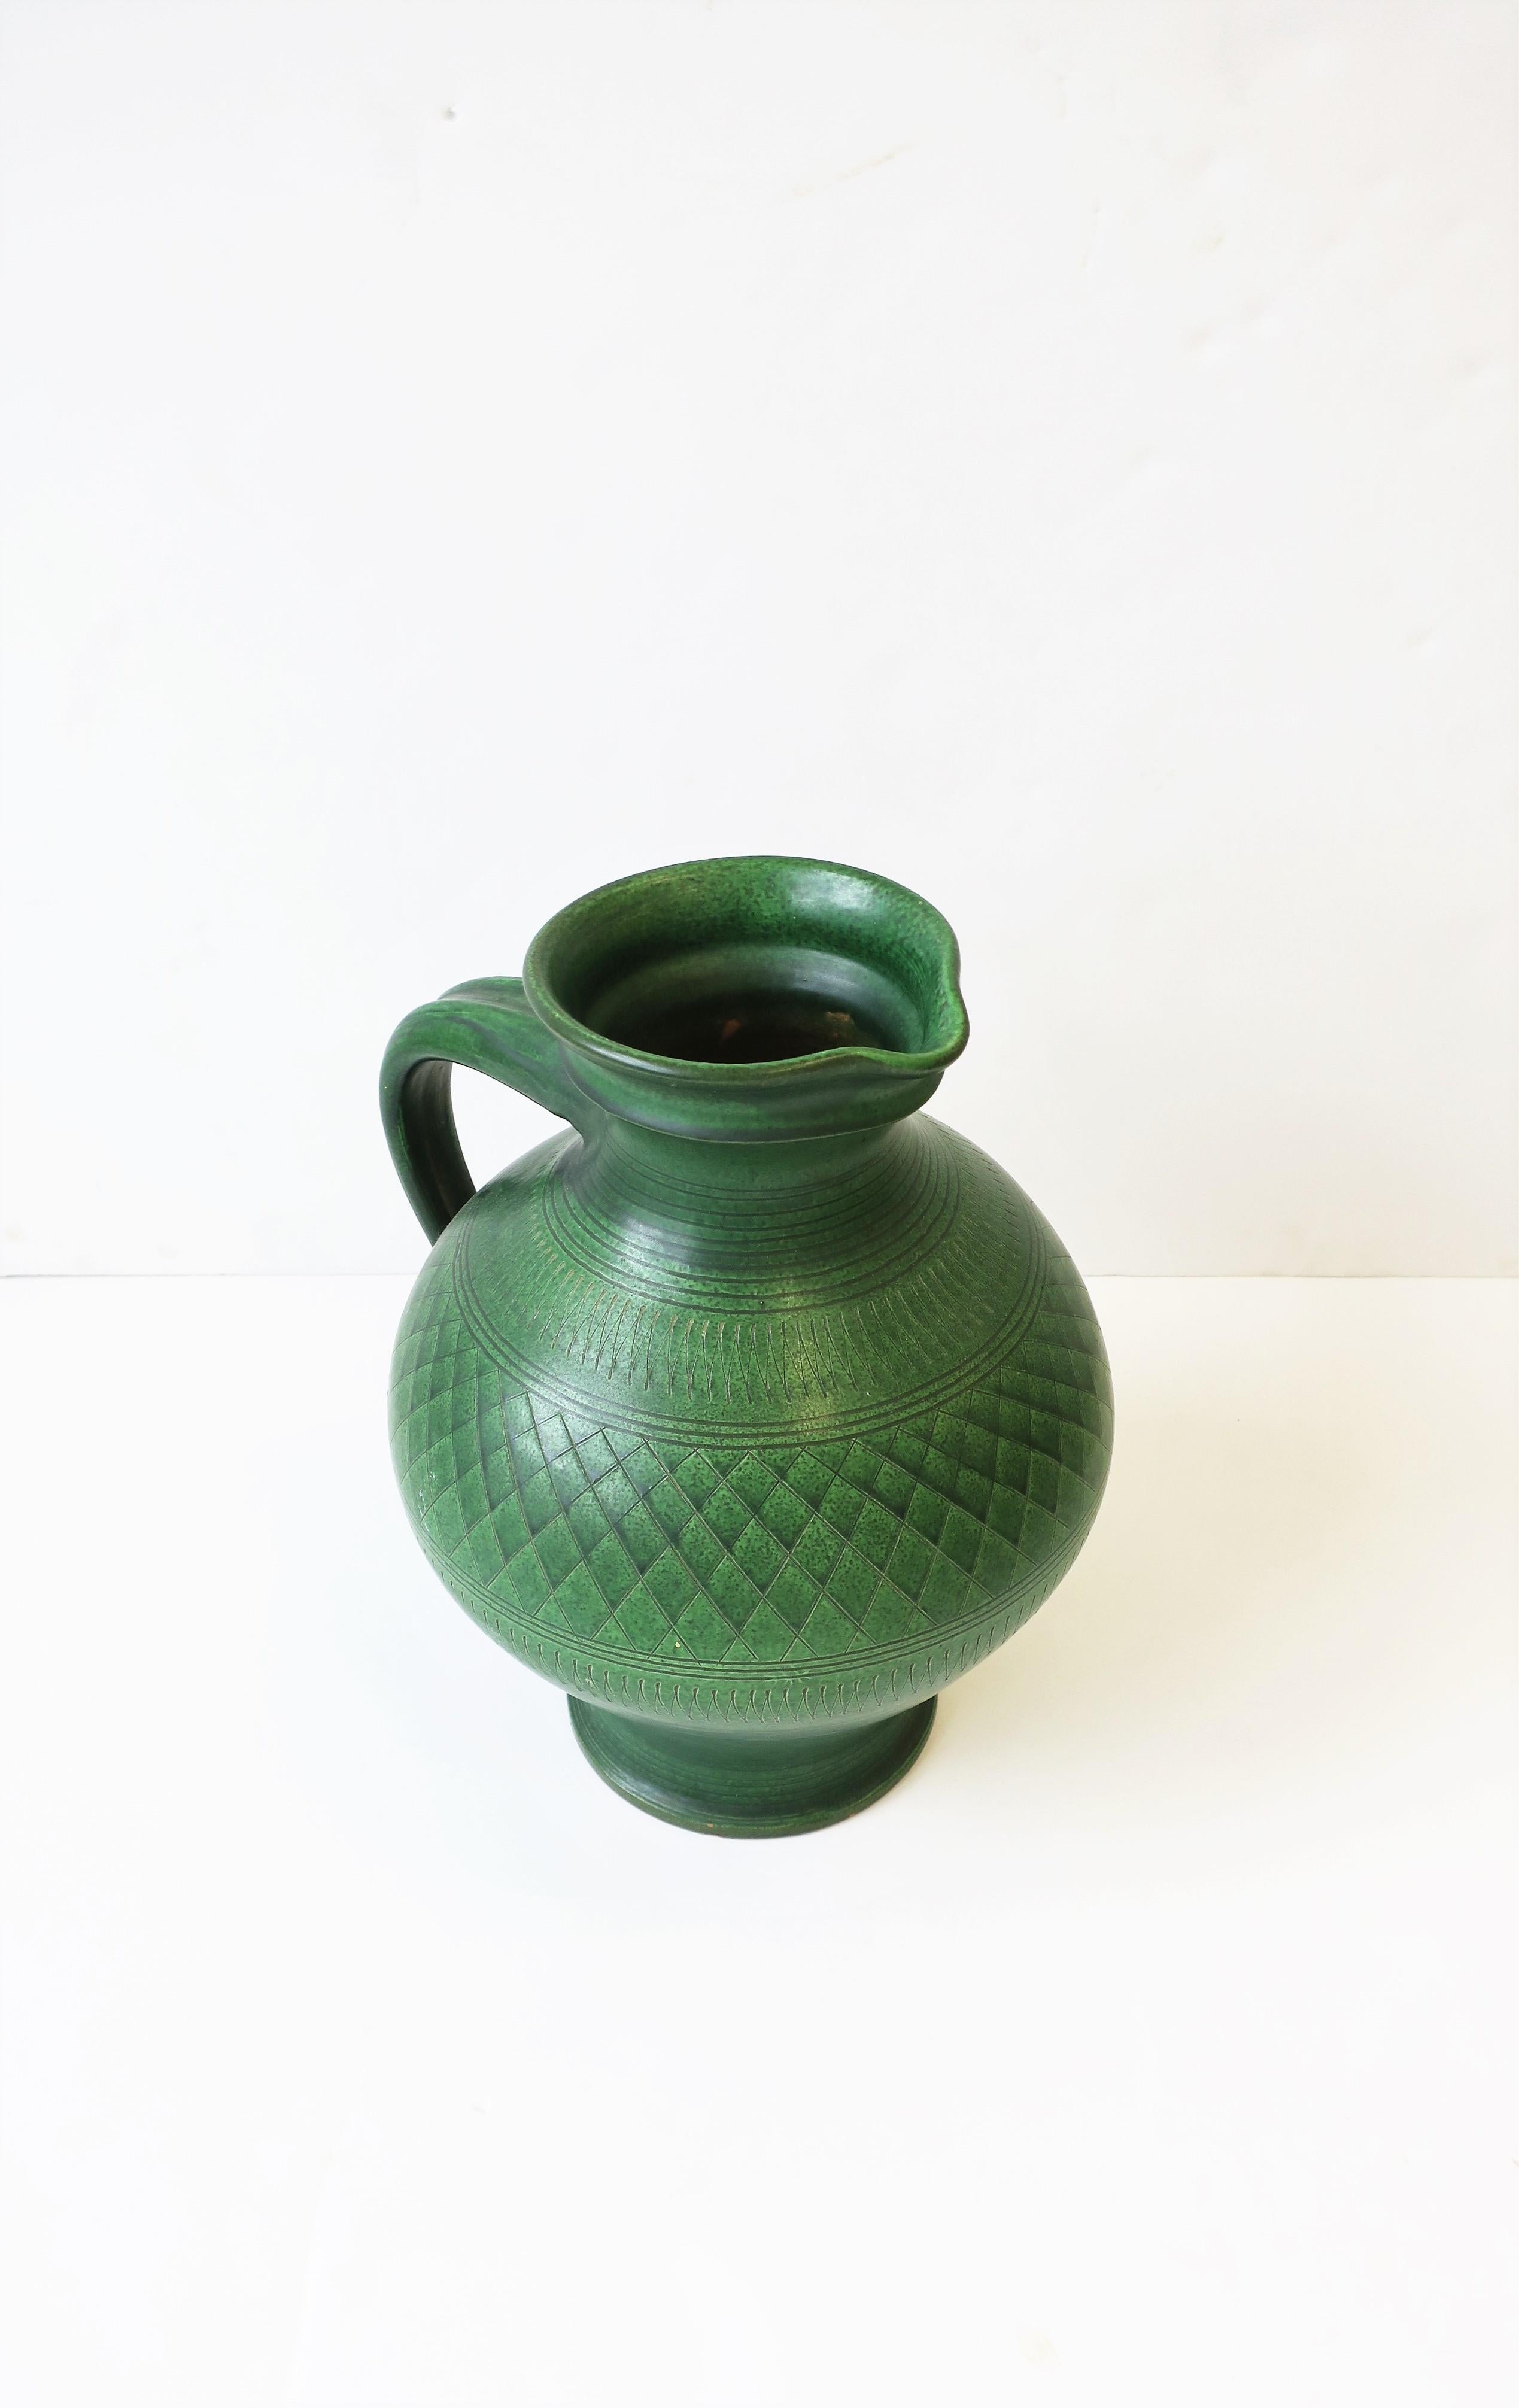 Hand-Crafted German Green Pottery Pitcher or Vase